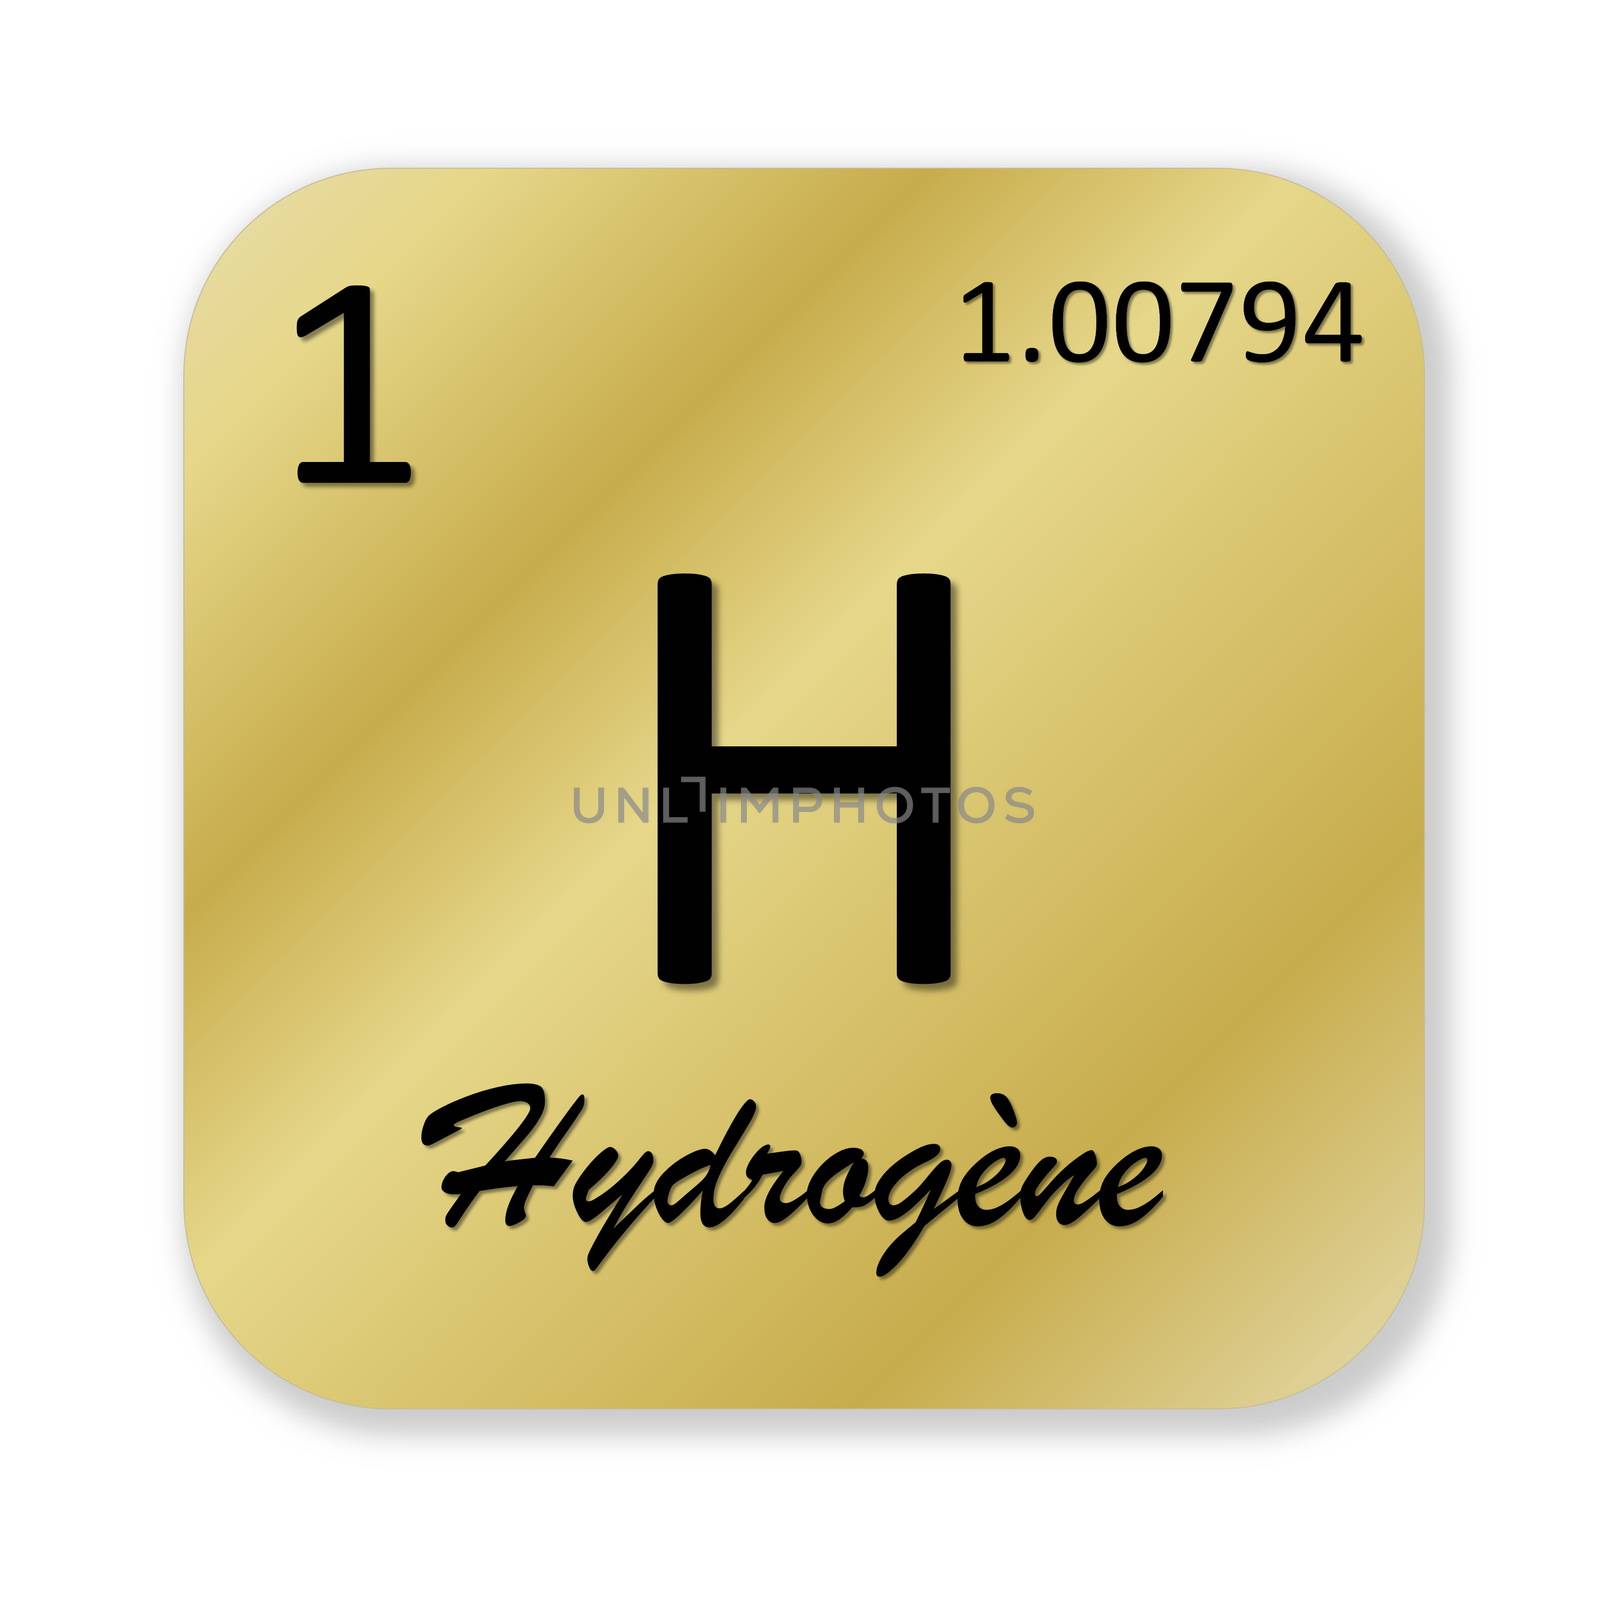 Black hydrogen element, french hydrogene, into golden square shape isolated in white background